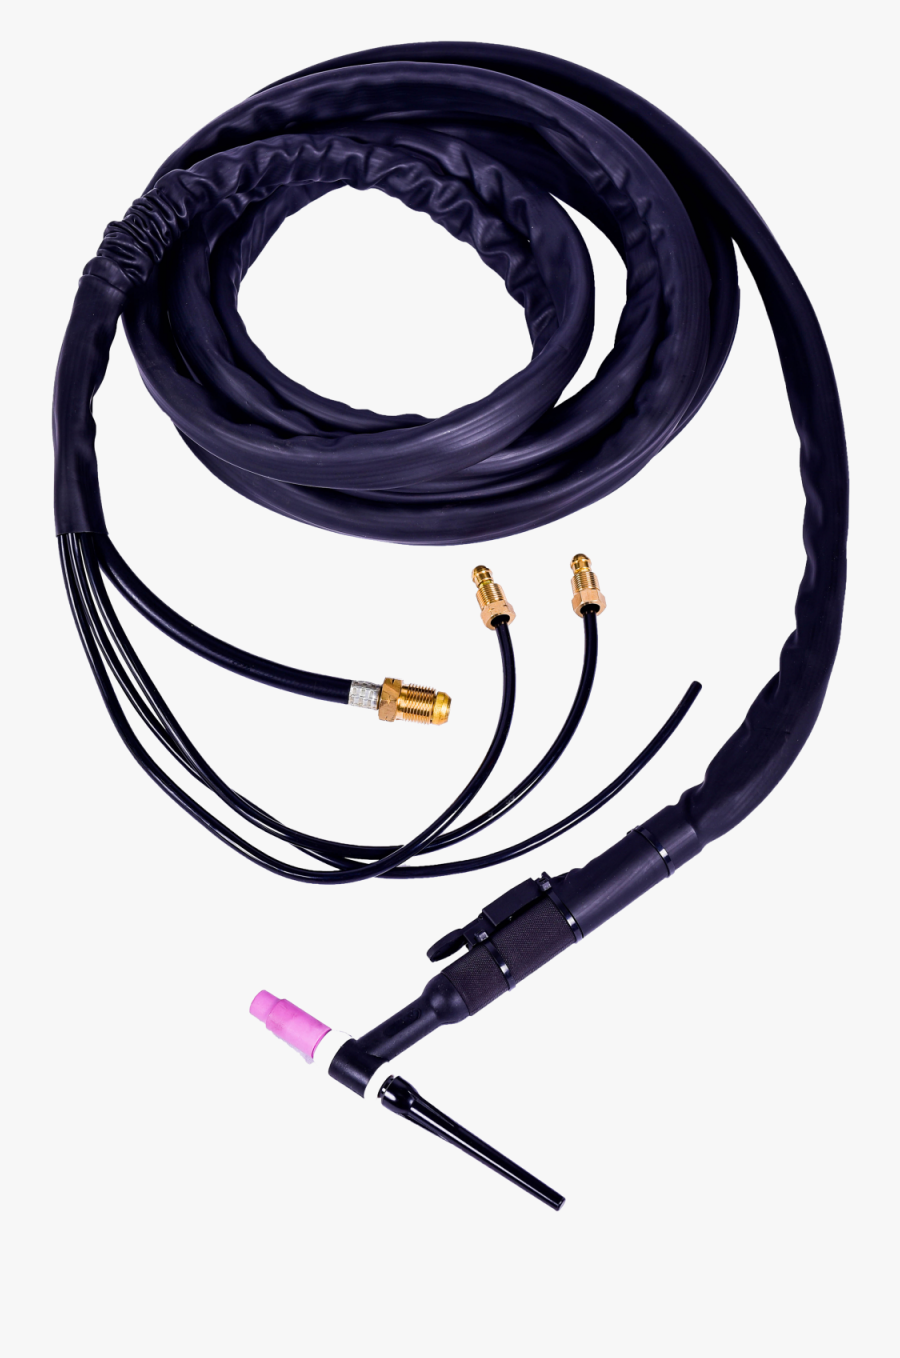 Networking Cables, Transparent Clipart